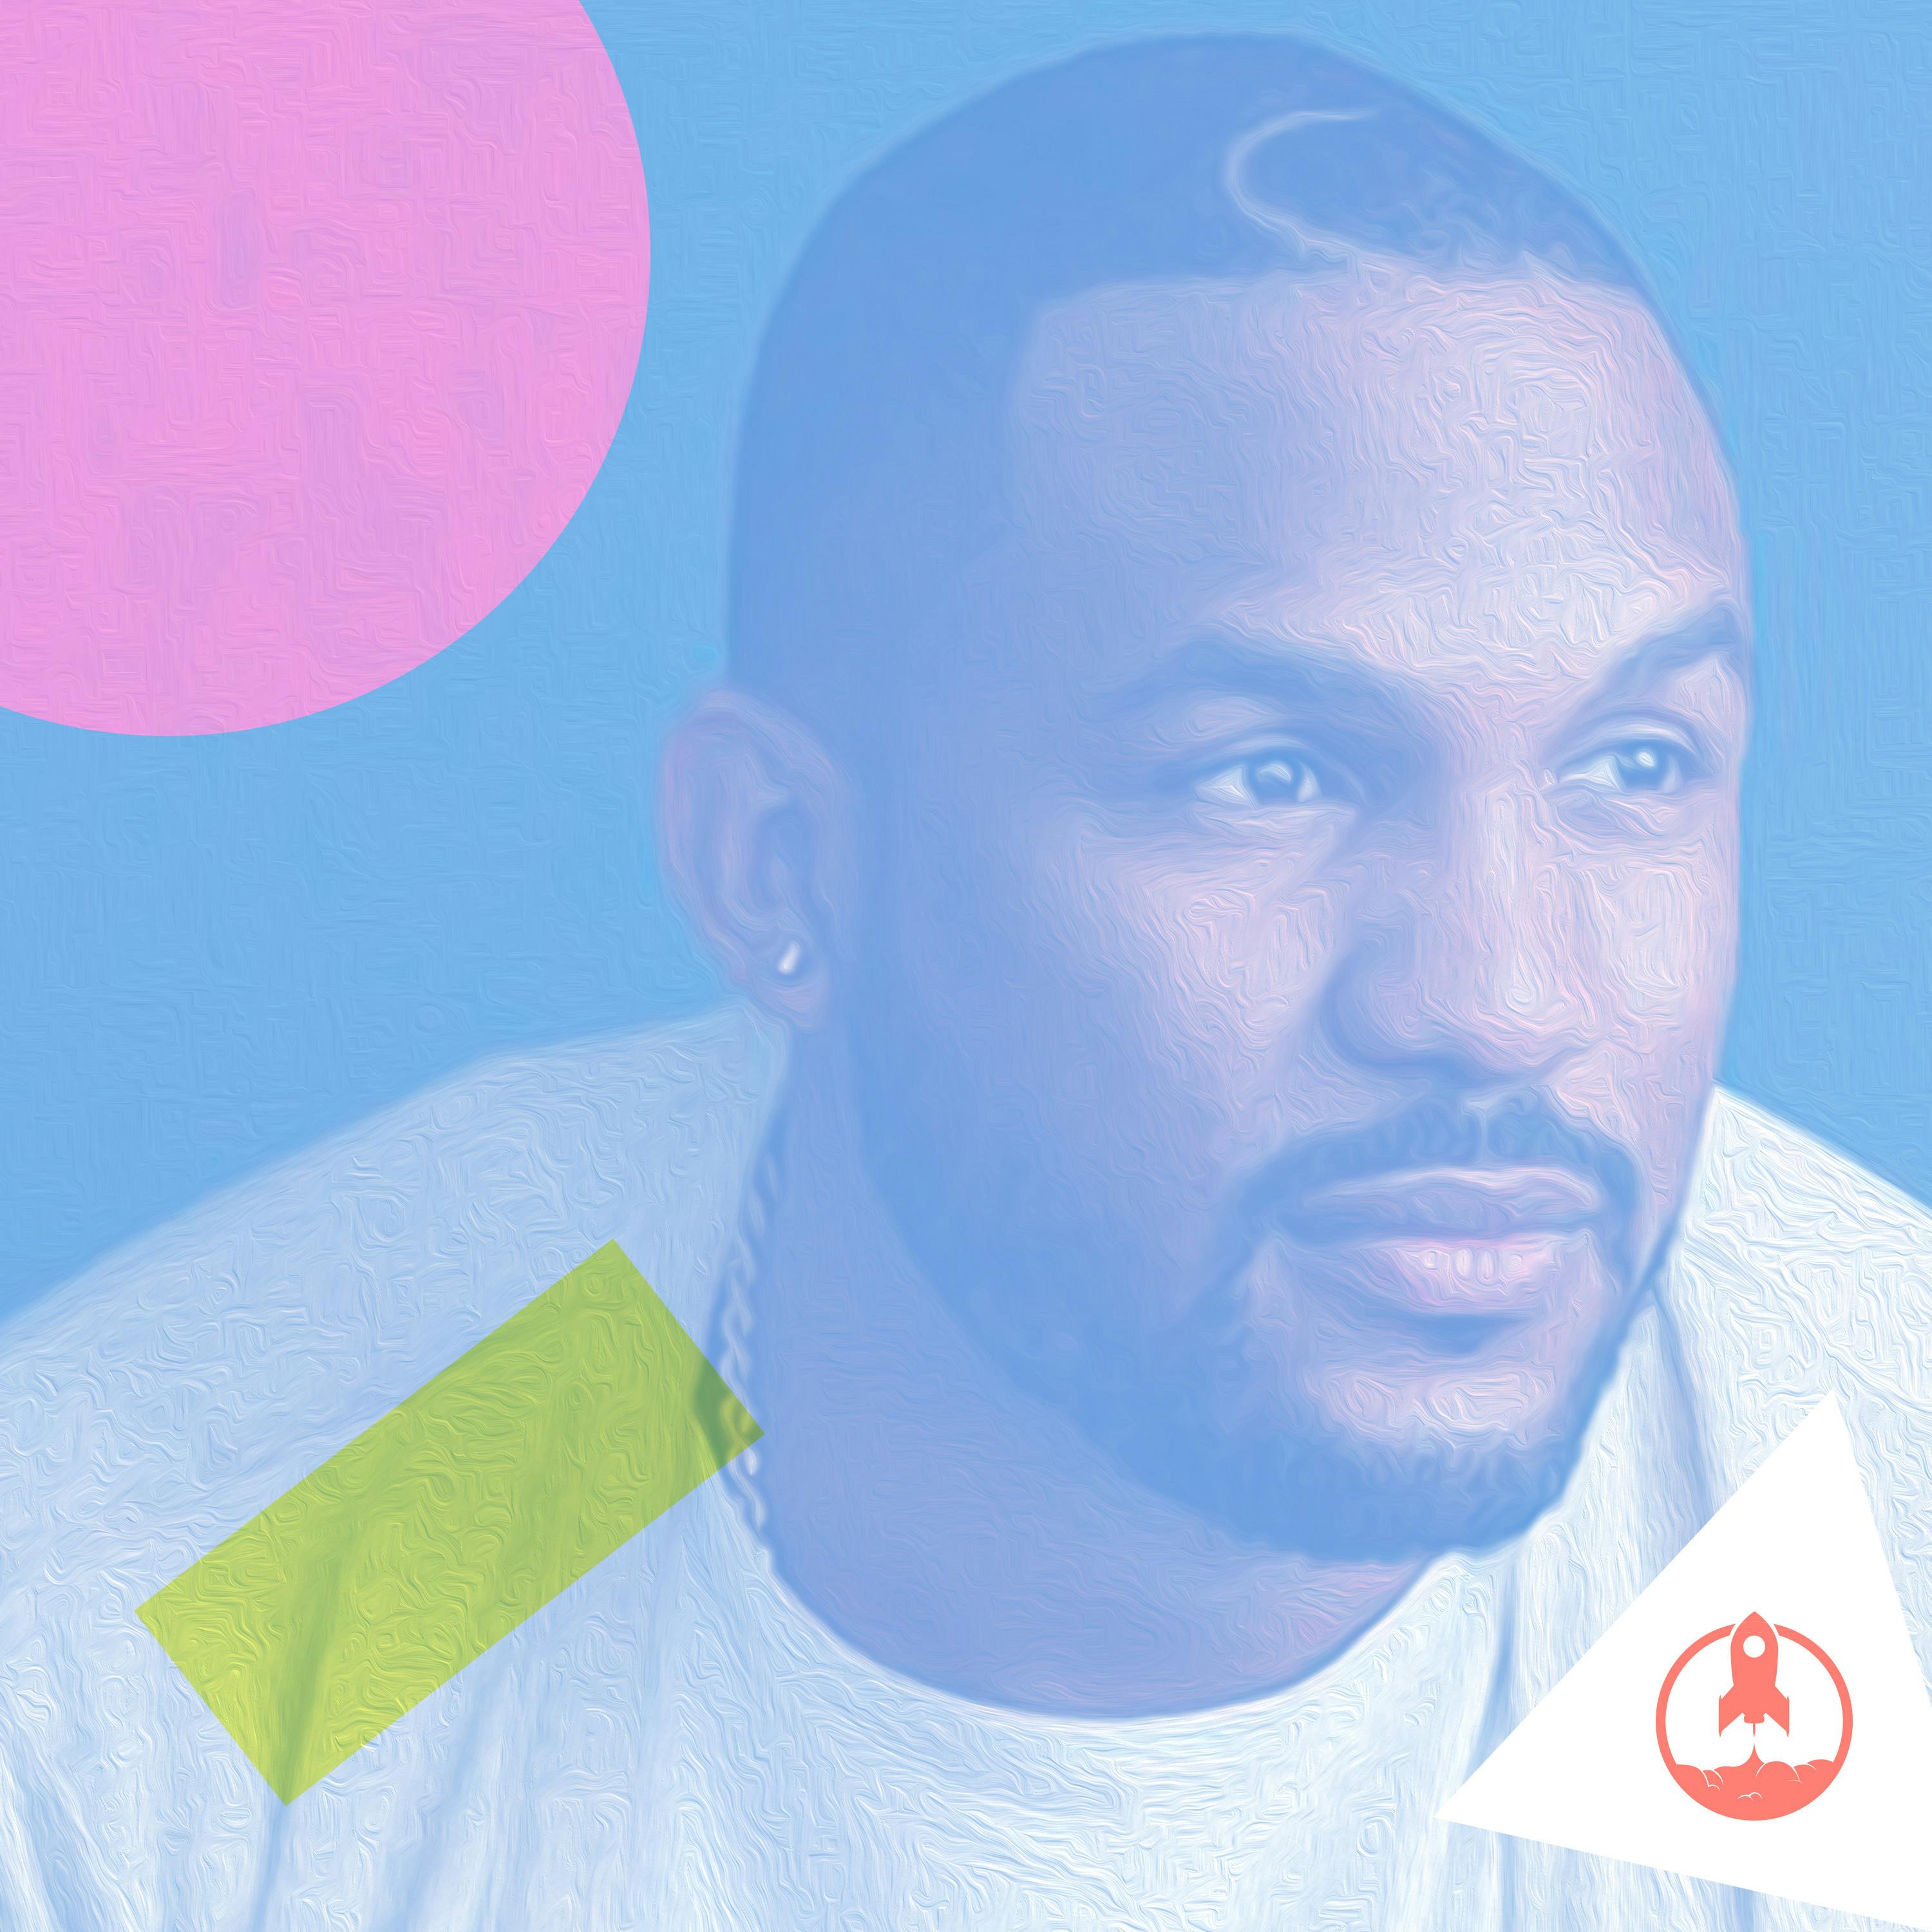 Interview: Everette Taylor of GrowthHackers on going from homeless to Forbes 30 under 30